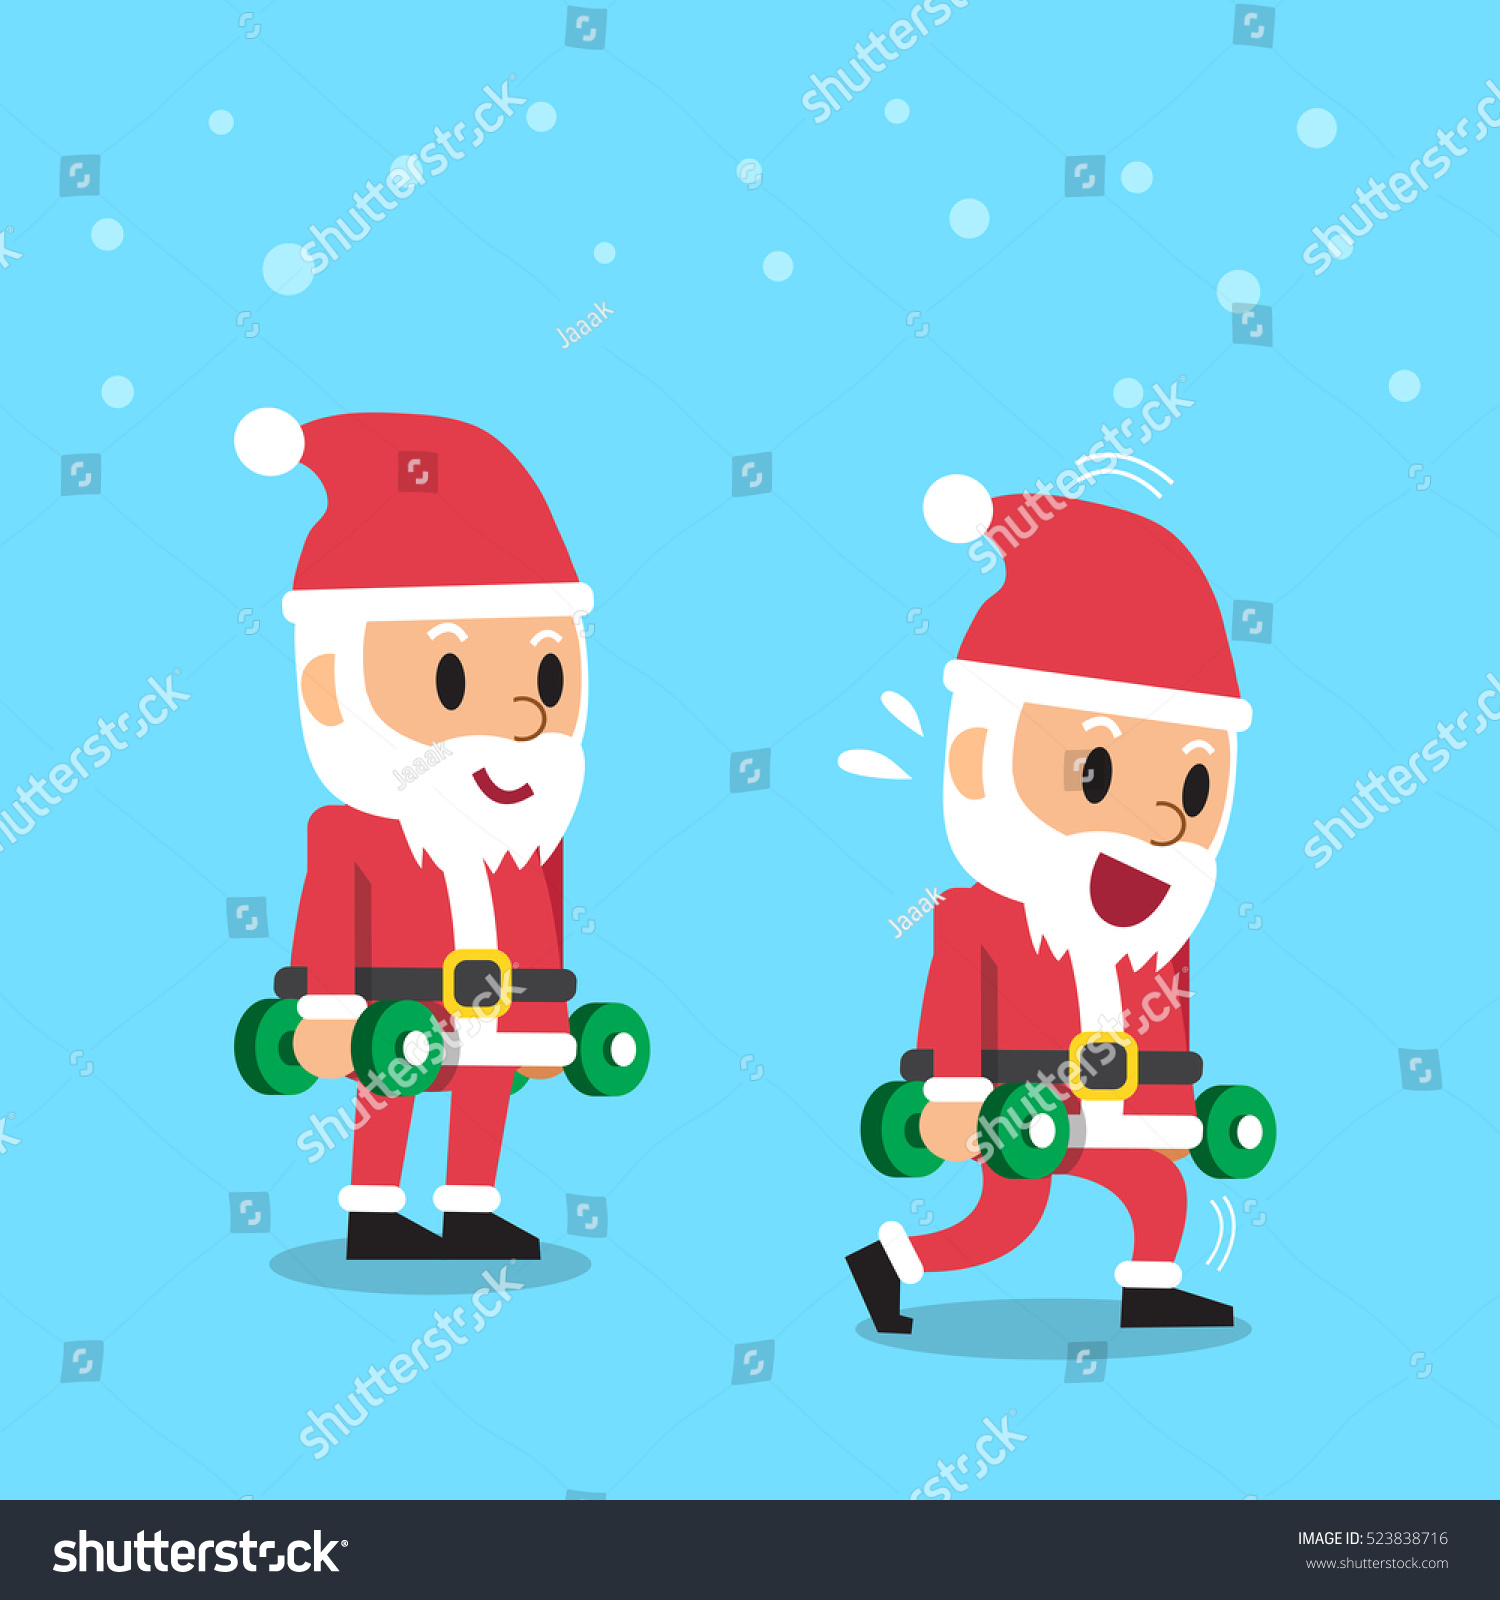 Cartoon Santa Claus Doing Dumbbell Lunge Stock Vector Royalty Free 523838716 8870